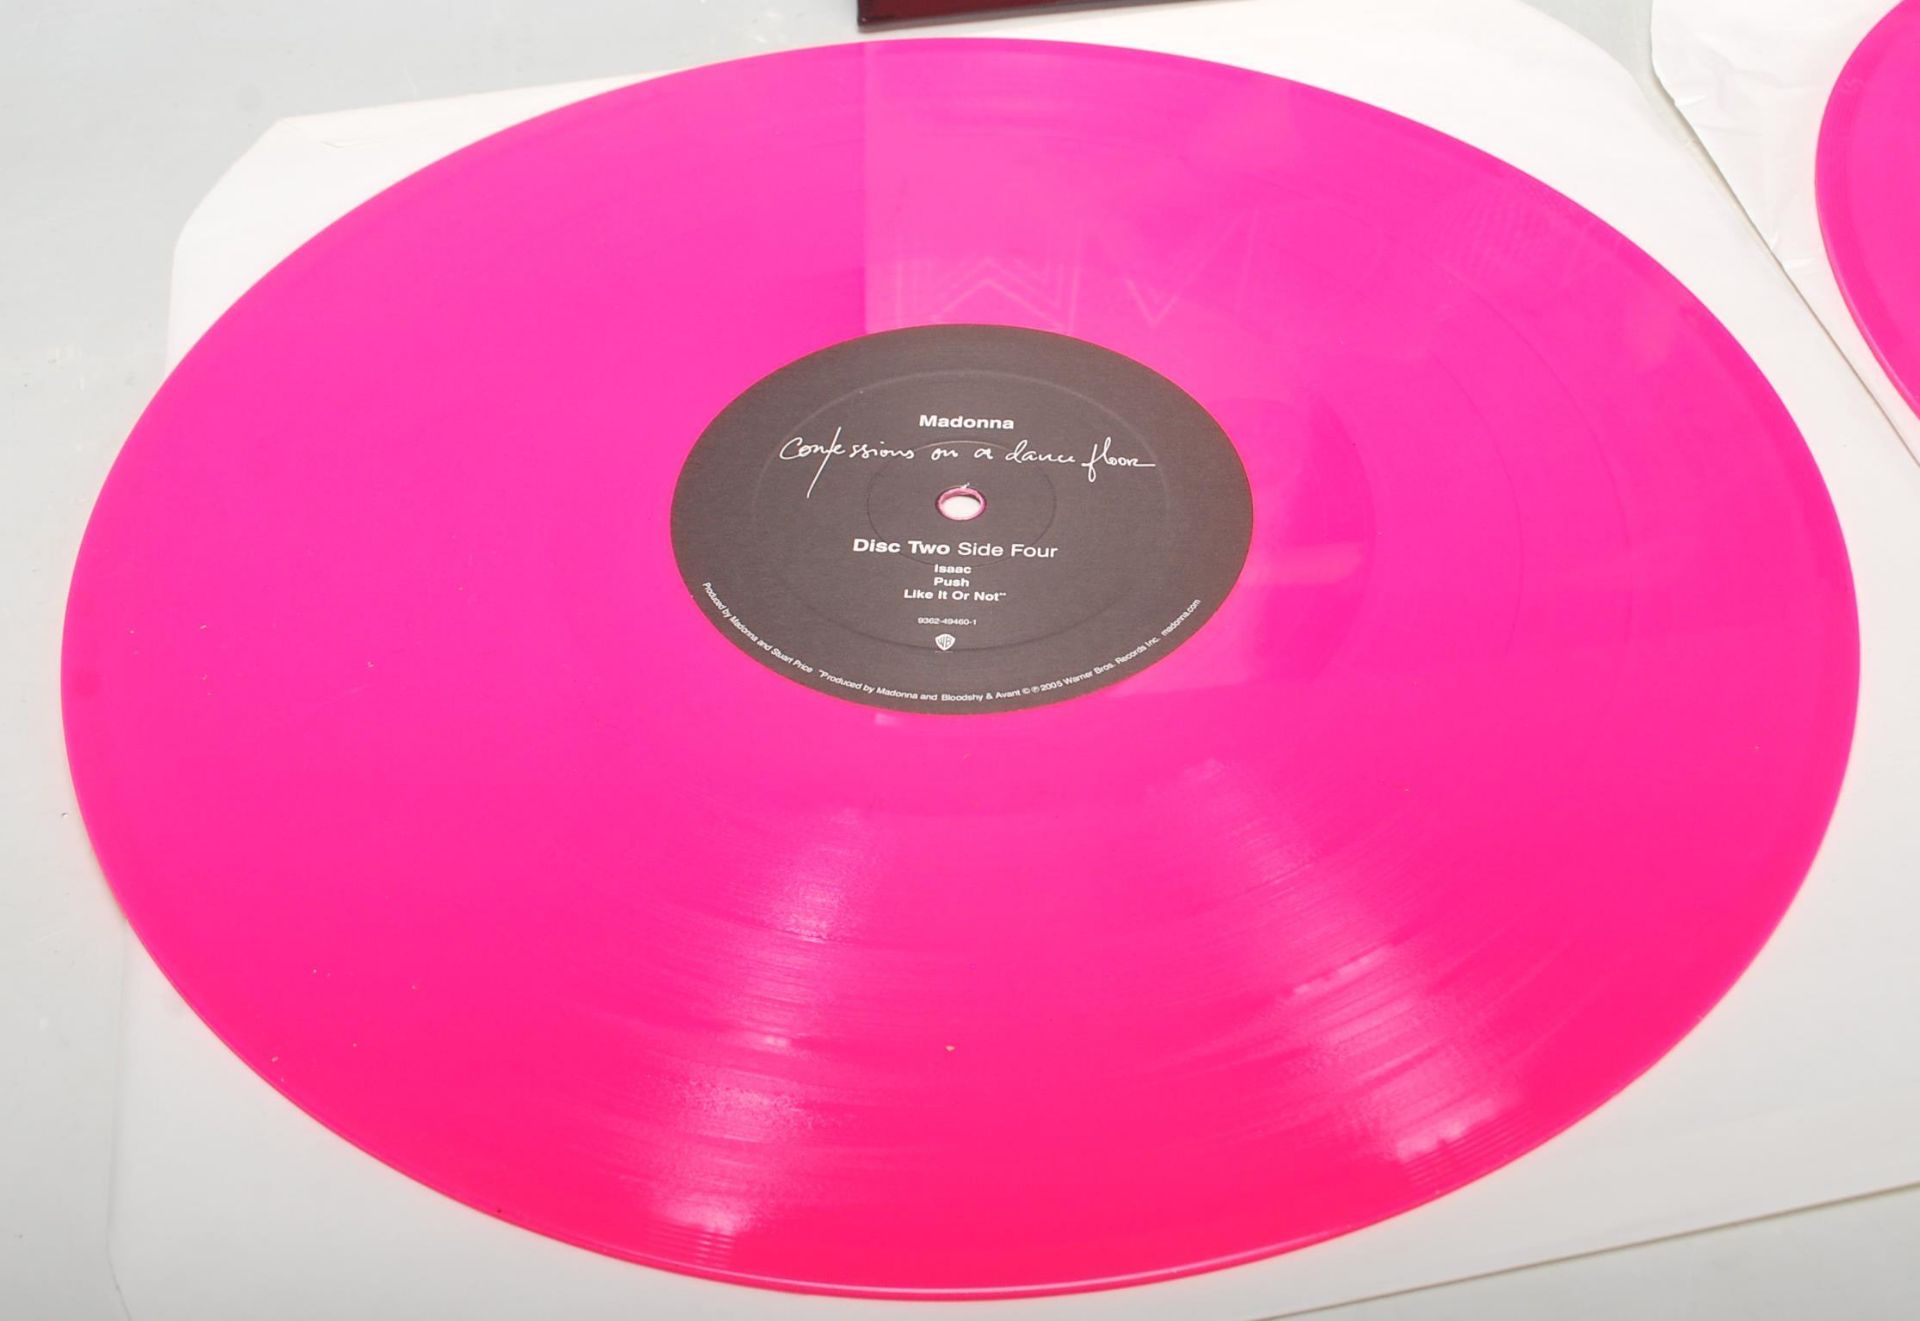 A vinyl long play LP record by Madonna - Confessions on a dance floor. Limited Edition Pink Vinyl. - Bild 5 aus 6